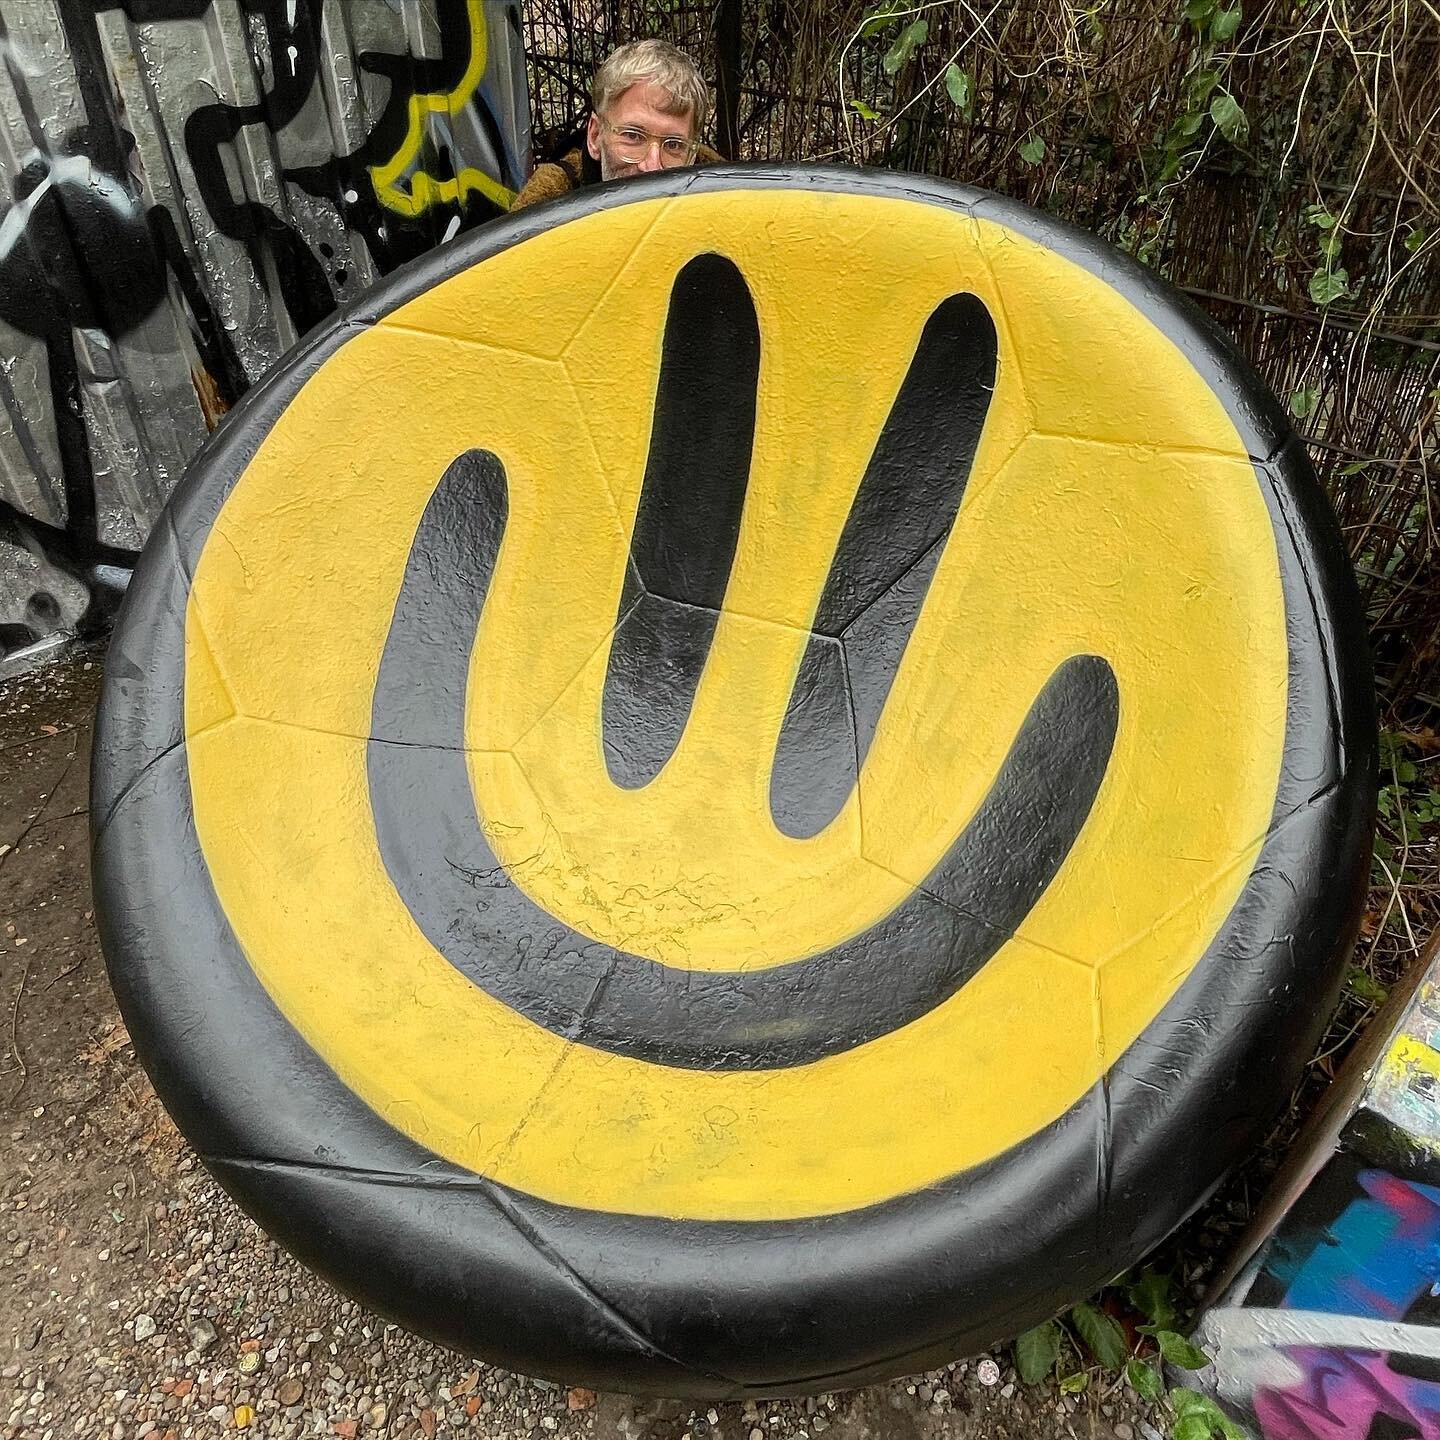 ☻︎☻︎ⓈⓂ︎ⒾⓁⒺⓎ ⓉⒶⓀⒺⓄⓋⒺⓇ☻︎☻︎
An impromptu Smiley to brighten up this neglected seat in Flora Park #Hamburg 💛😃💫

#smiley #smile #art #happiness #acidhouse #positivity #smileyface #streetart